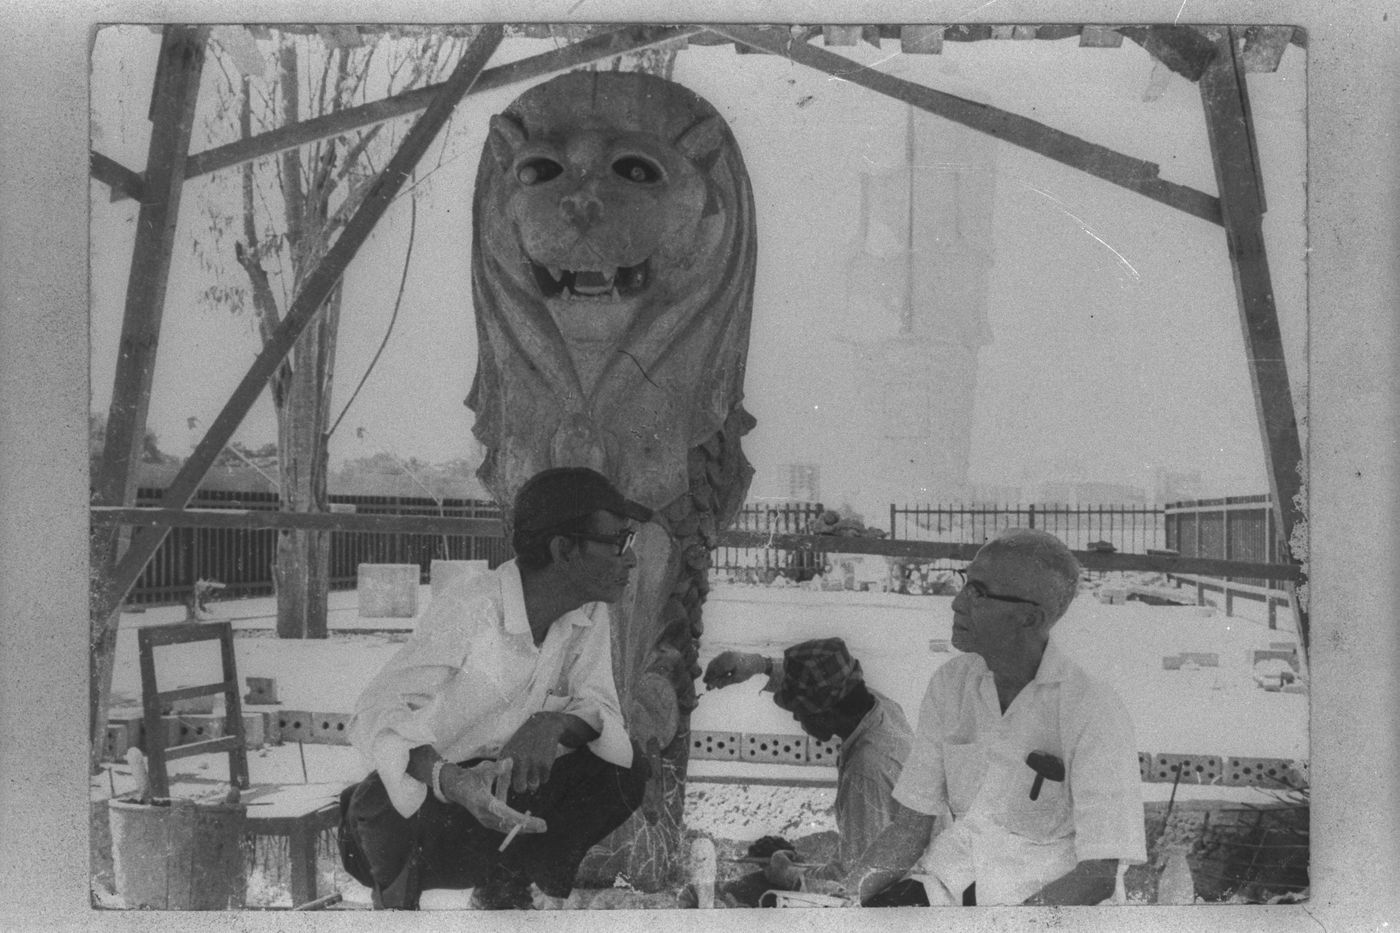 Mr Lim (left) at his worksite with one of the Merlion statues (background) sculpted by him.</br>1972, Lim Nang Seng